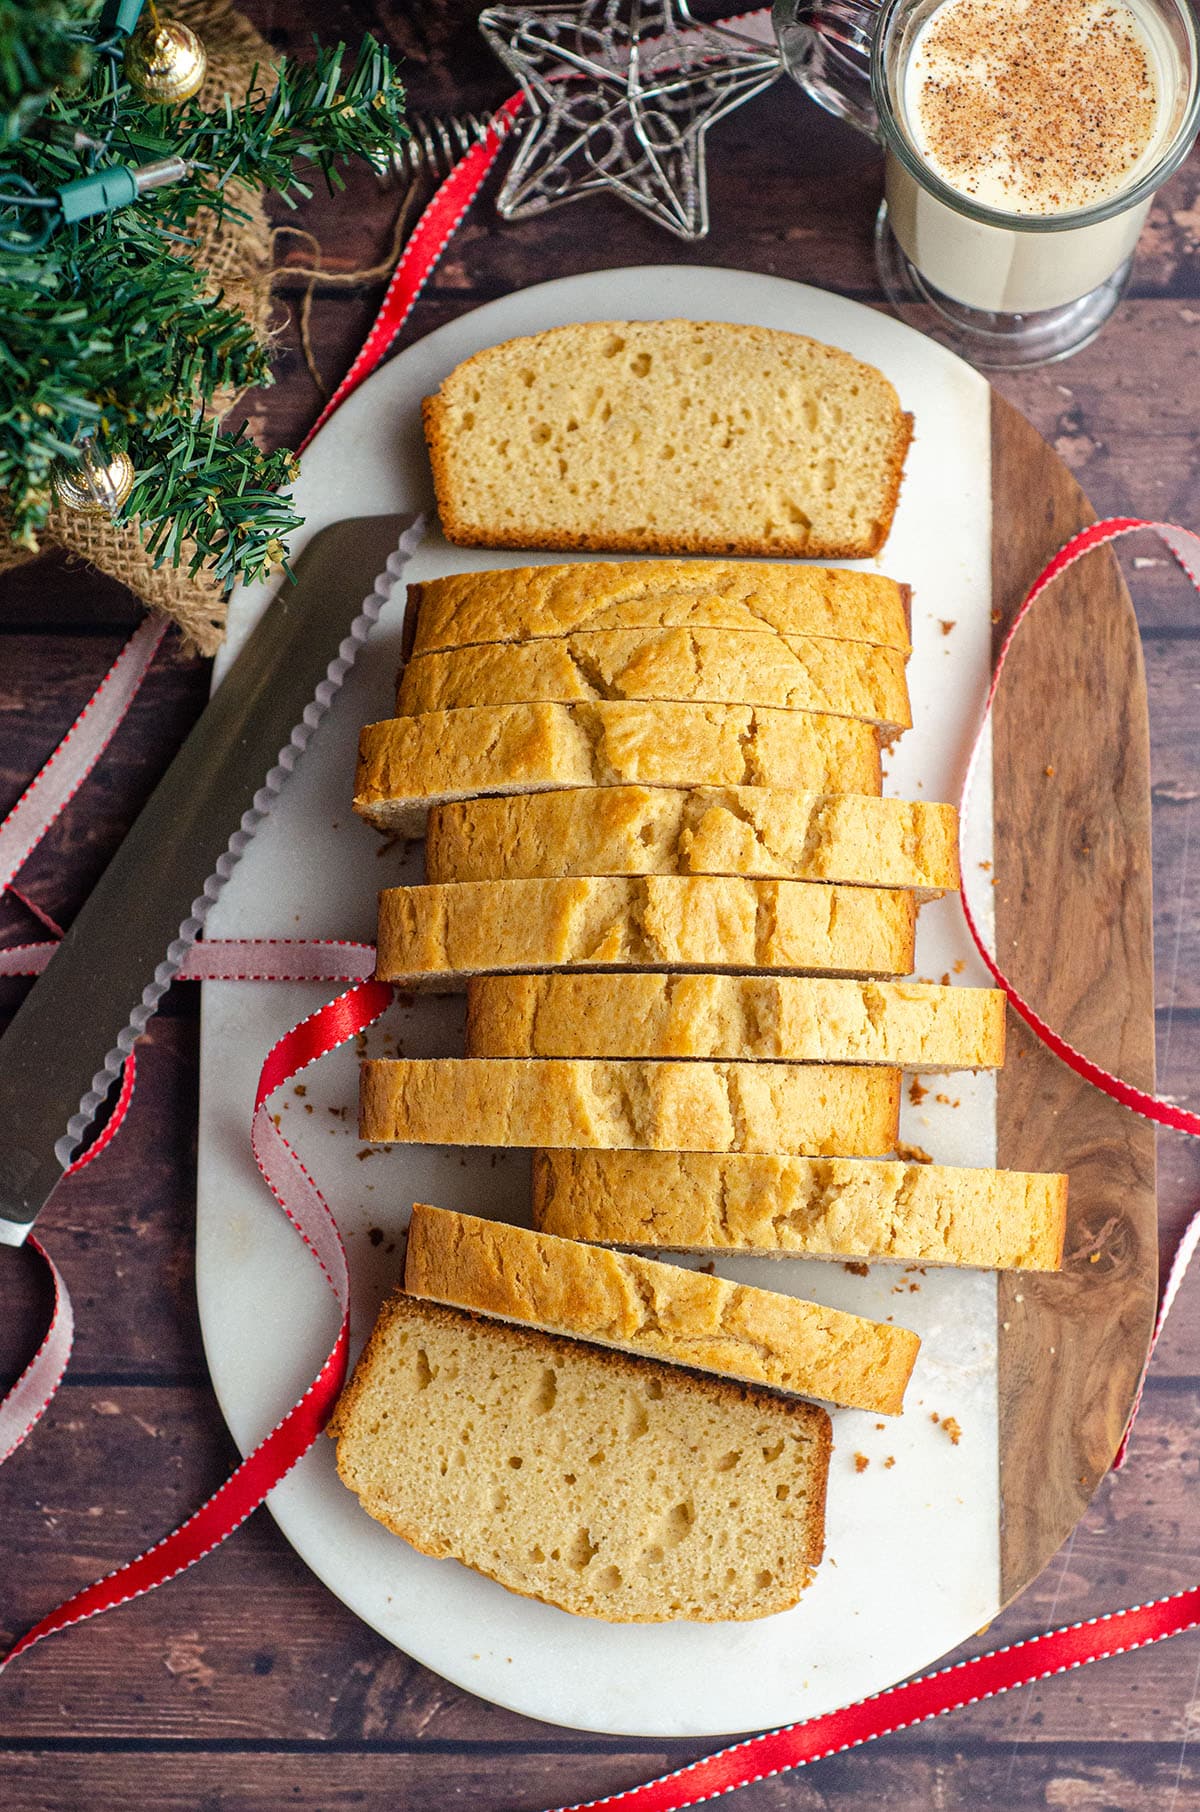 A spiced bread made with actual eggnog for maximum flavor and moisture. via @frshaprilflours